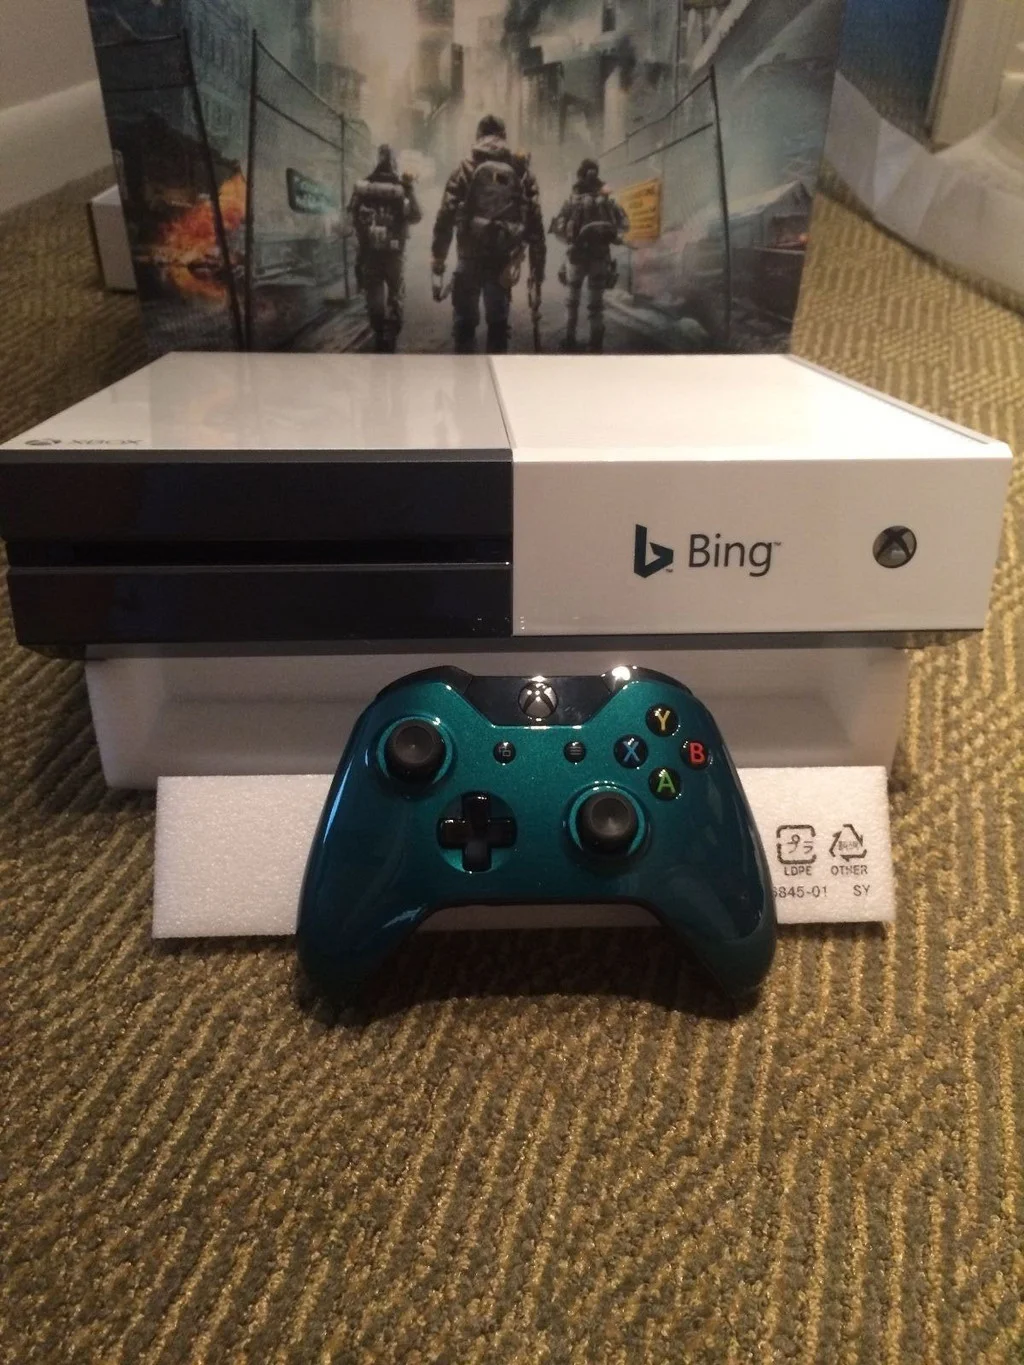 NEW CONSOLE ADDED : XBOX ONE BING EDITION